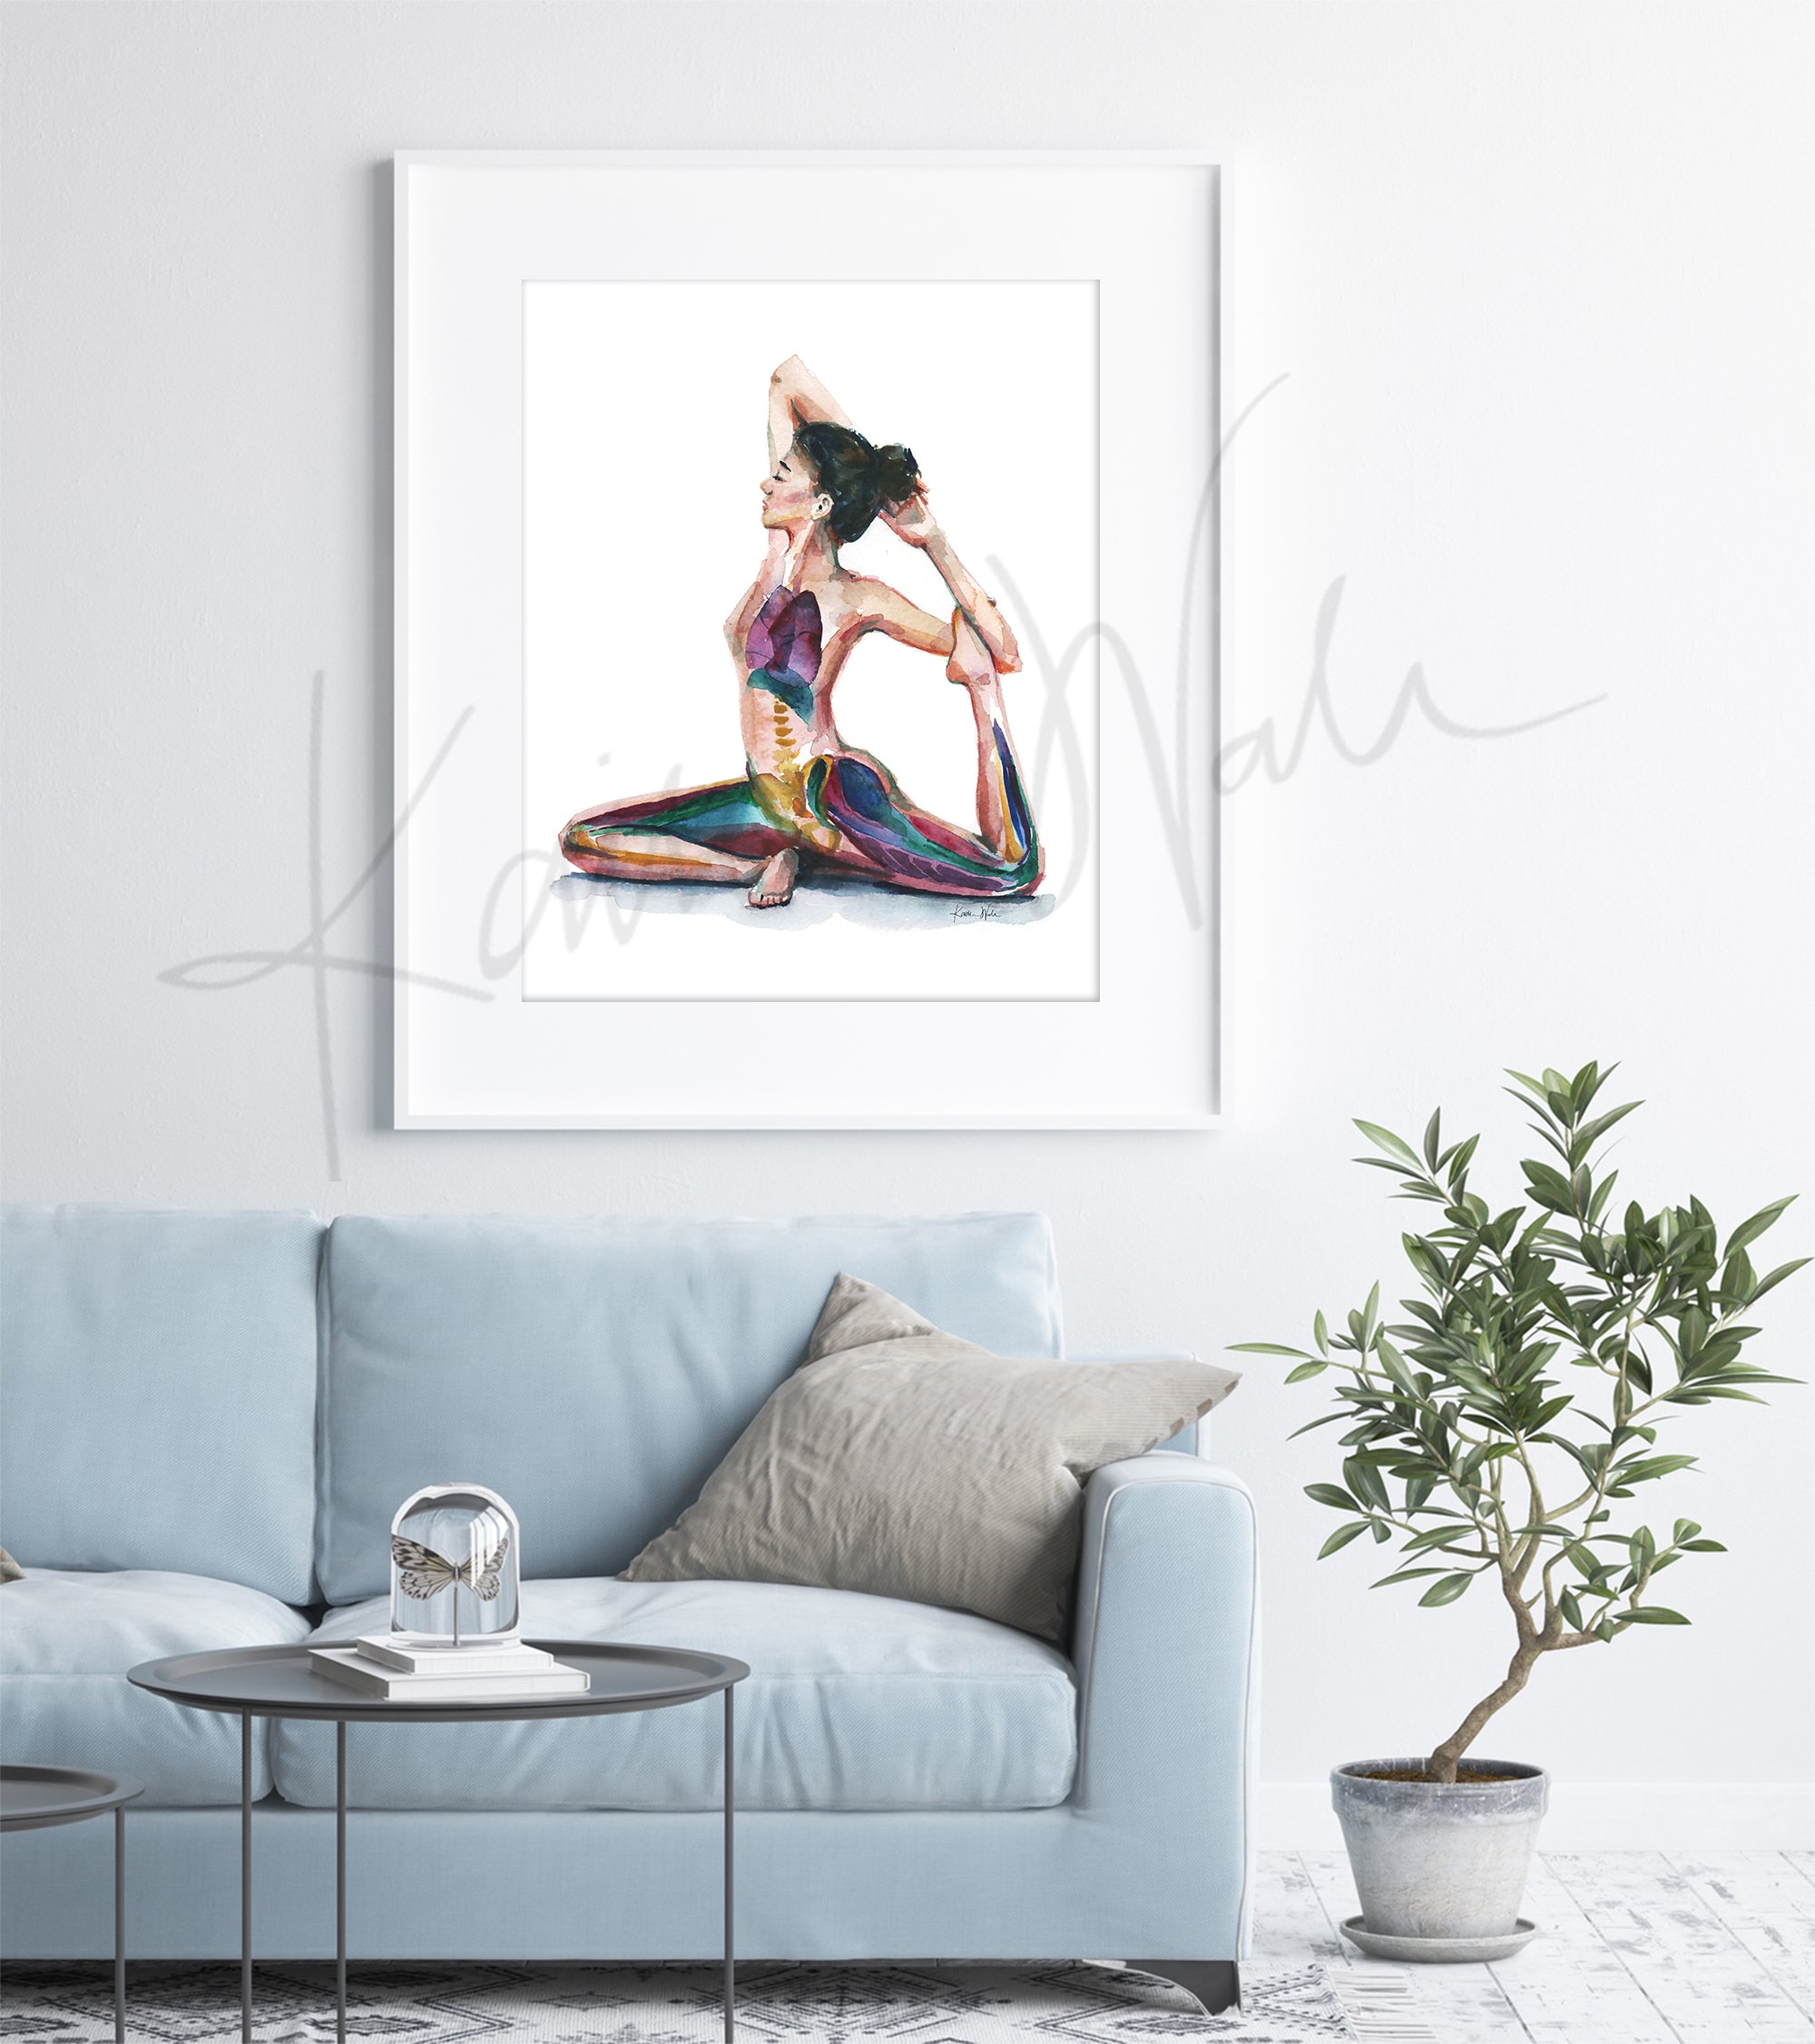 Framed watercolor painting of a woman with her eyes closed in a seated yoga position stretching her leg behind her. The painting is hanging over a blue couch.